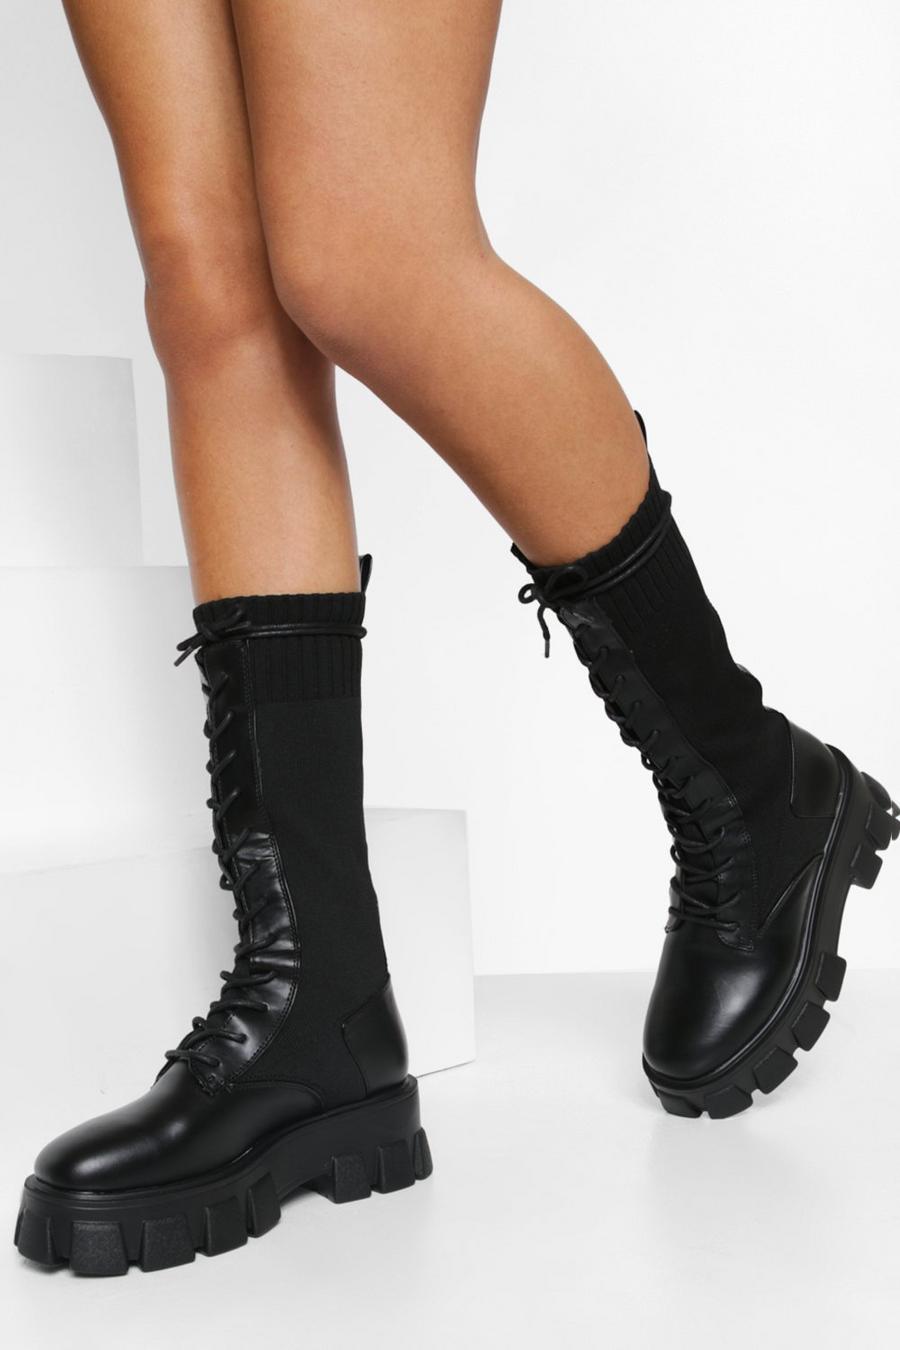 Black Chunky Lace Up Calf High Boots